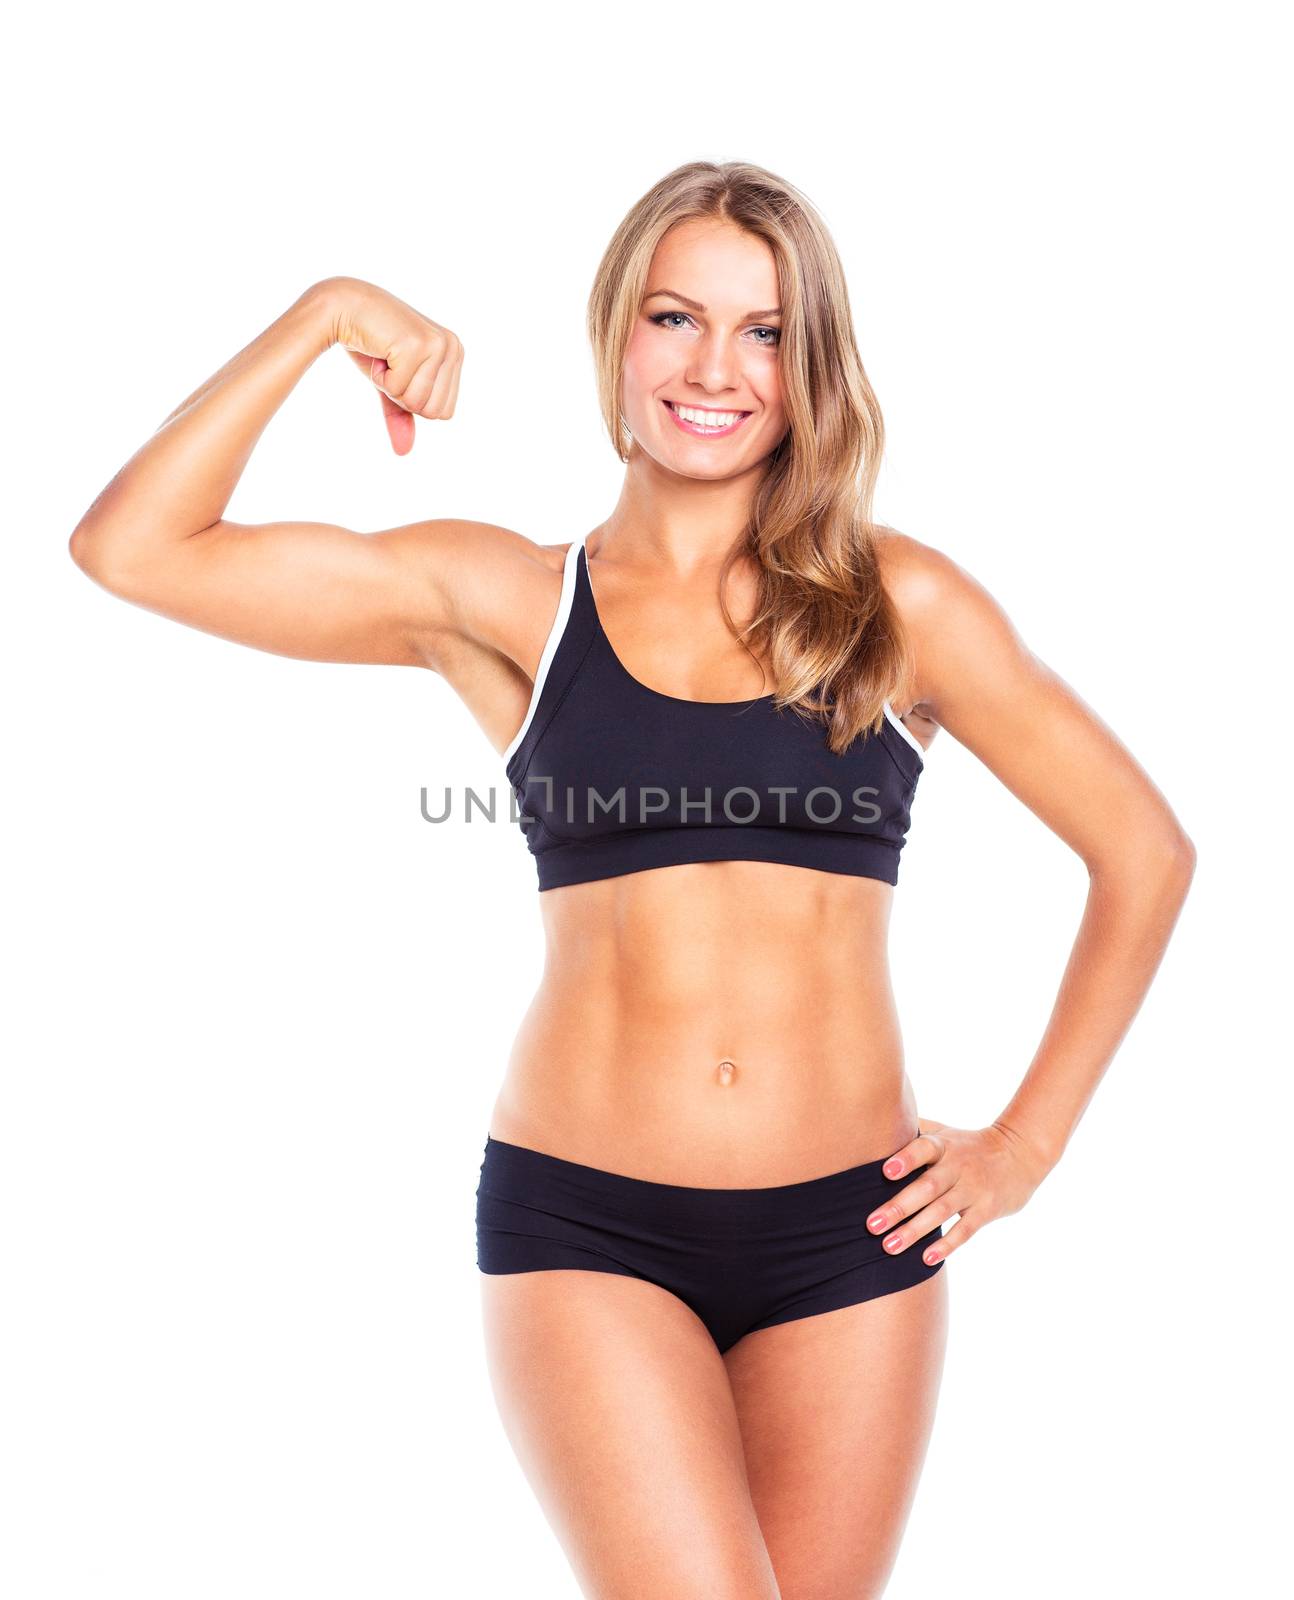 Young athletic girl on white background